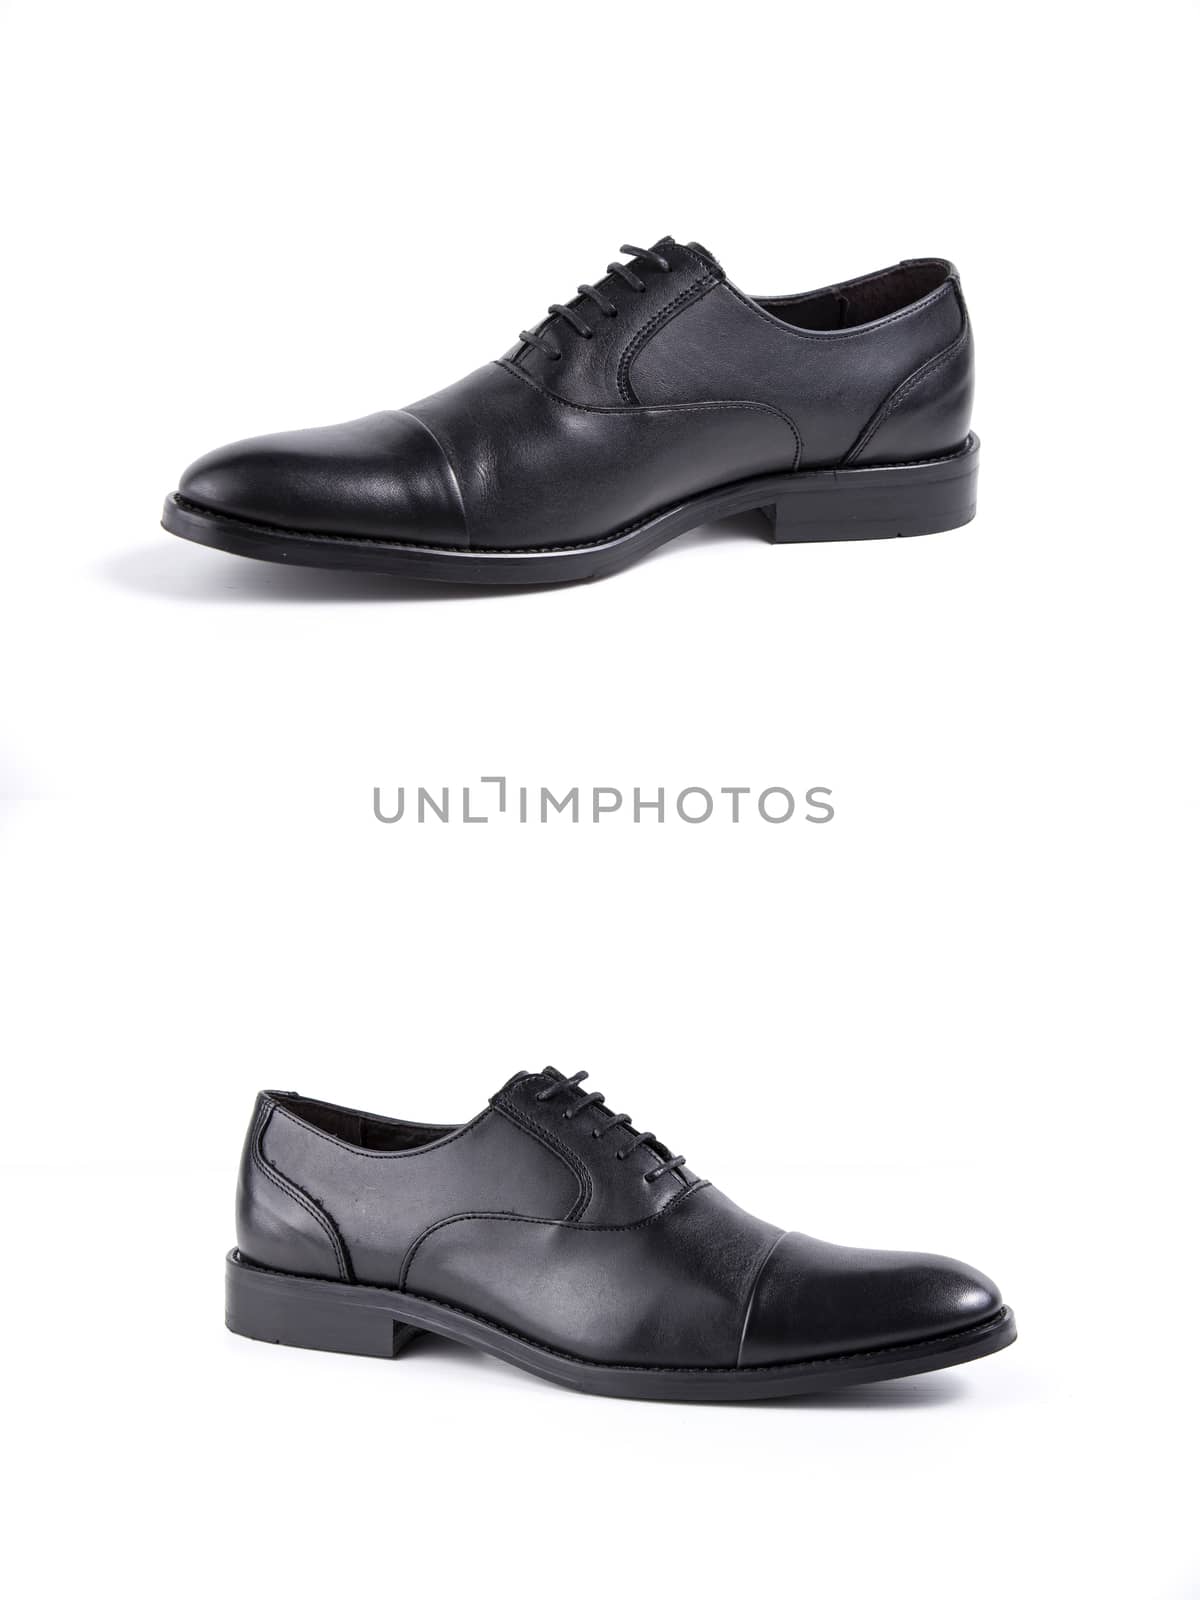 Male black leather shoes on white background, isolated product.